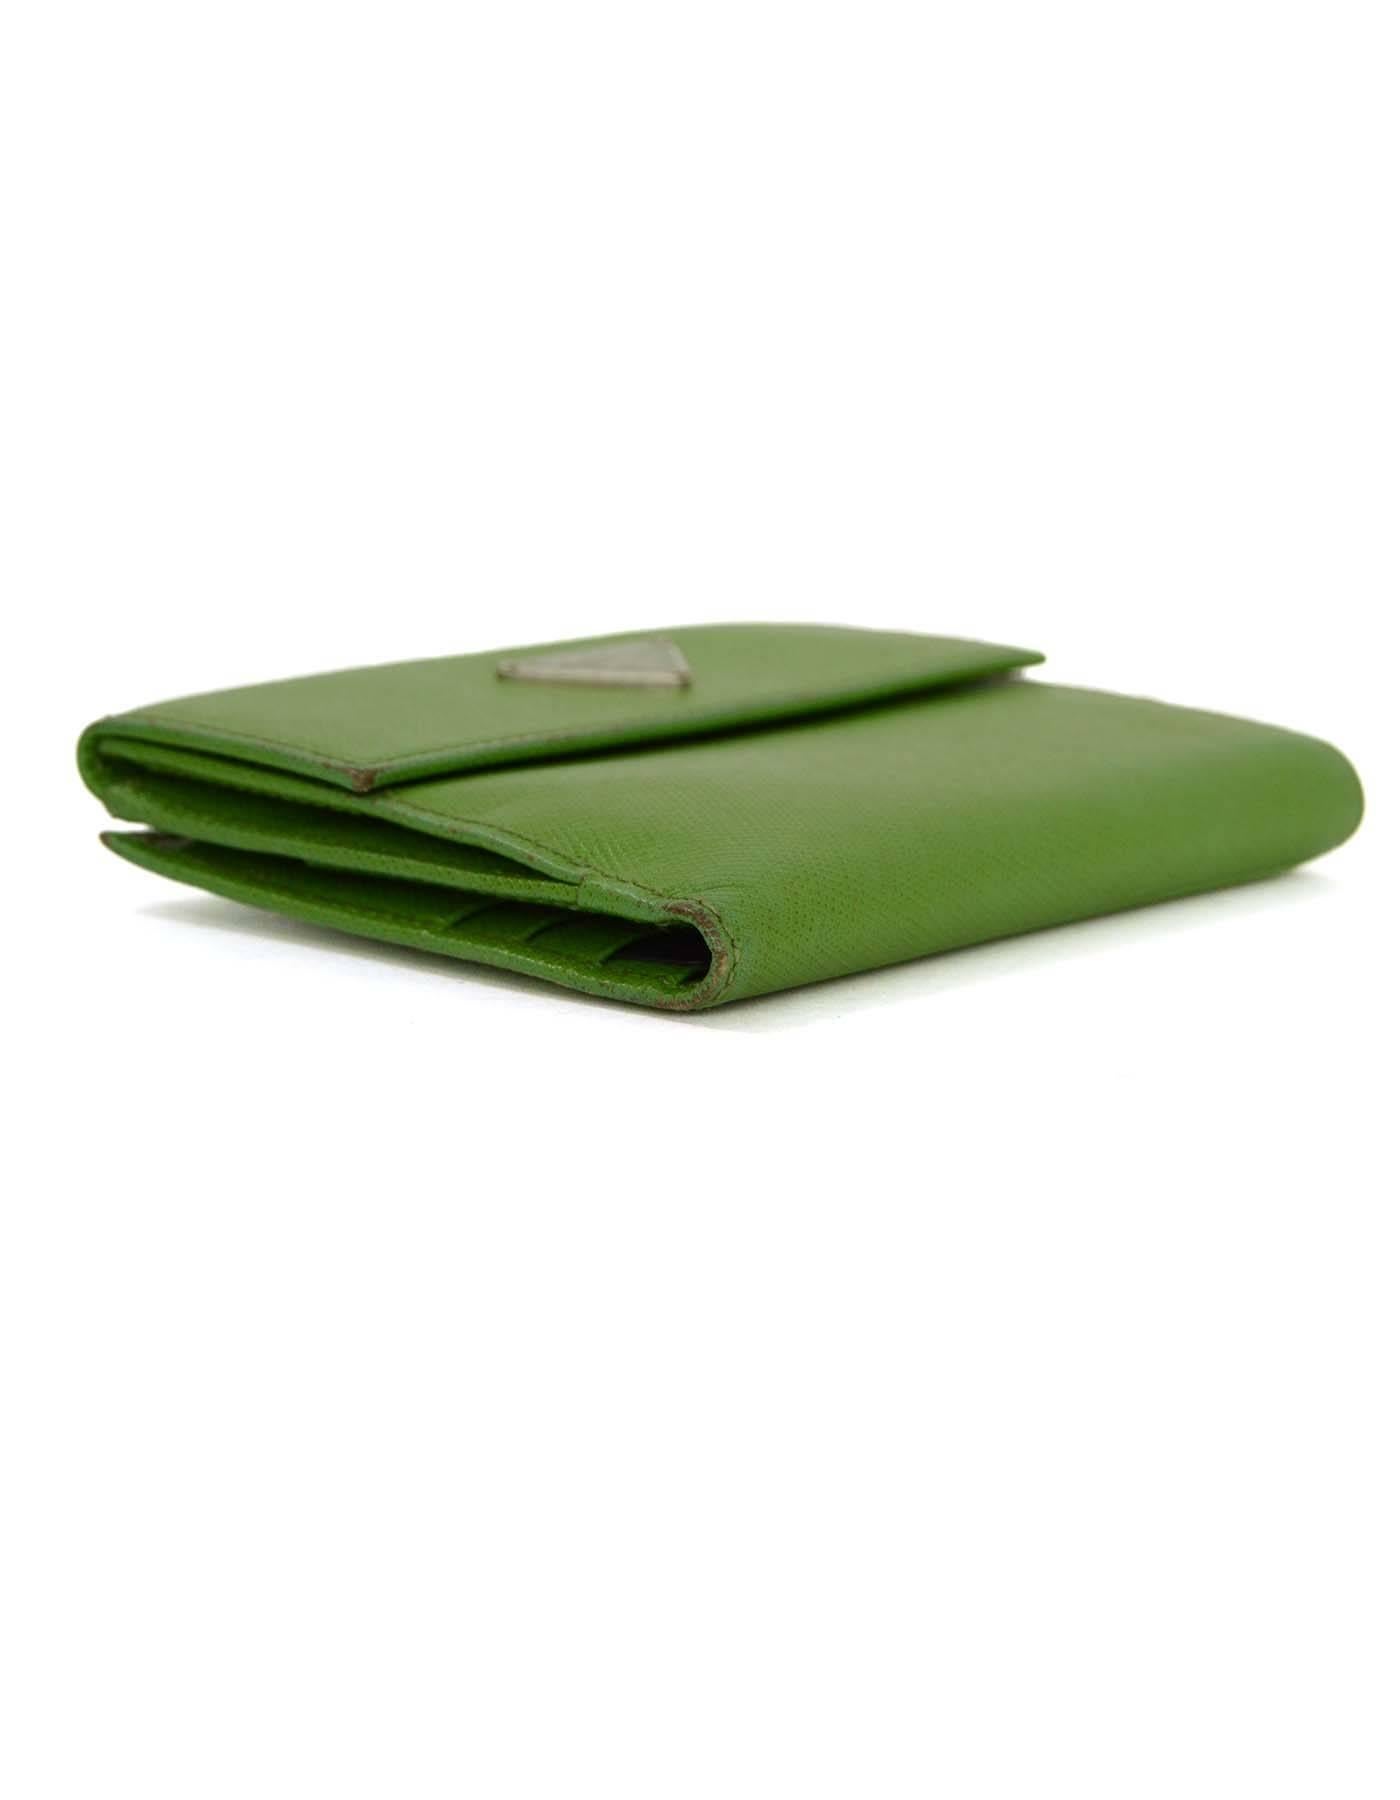 Prada Apple Green Saffiano Short Wallet SHW In Excellent Condition In New York, NY